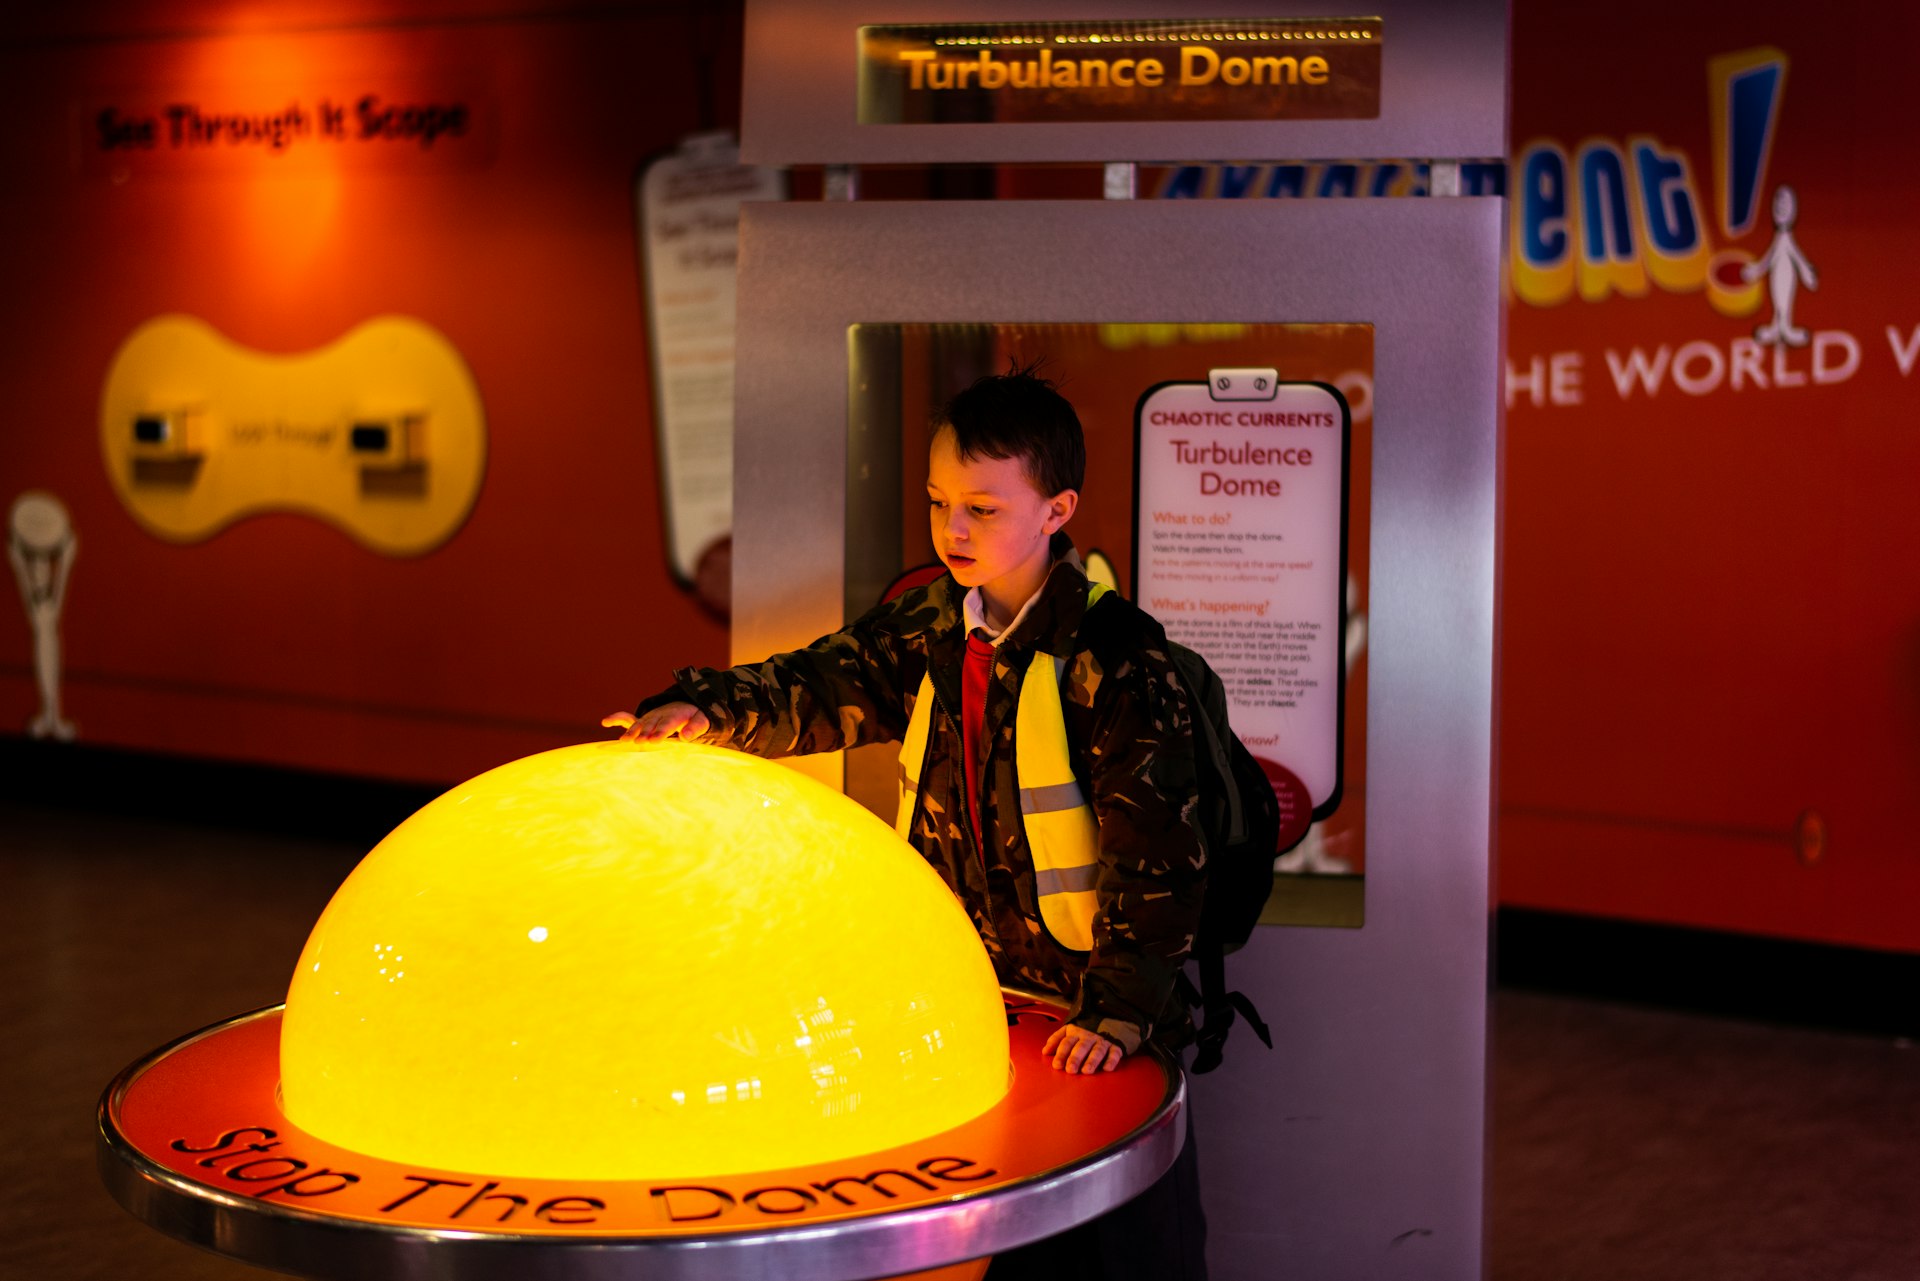 A young boy reaches out to touch a glowing yellow dome in a hands-on interactive gallery in Manchester's Science Museum